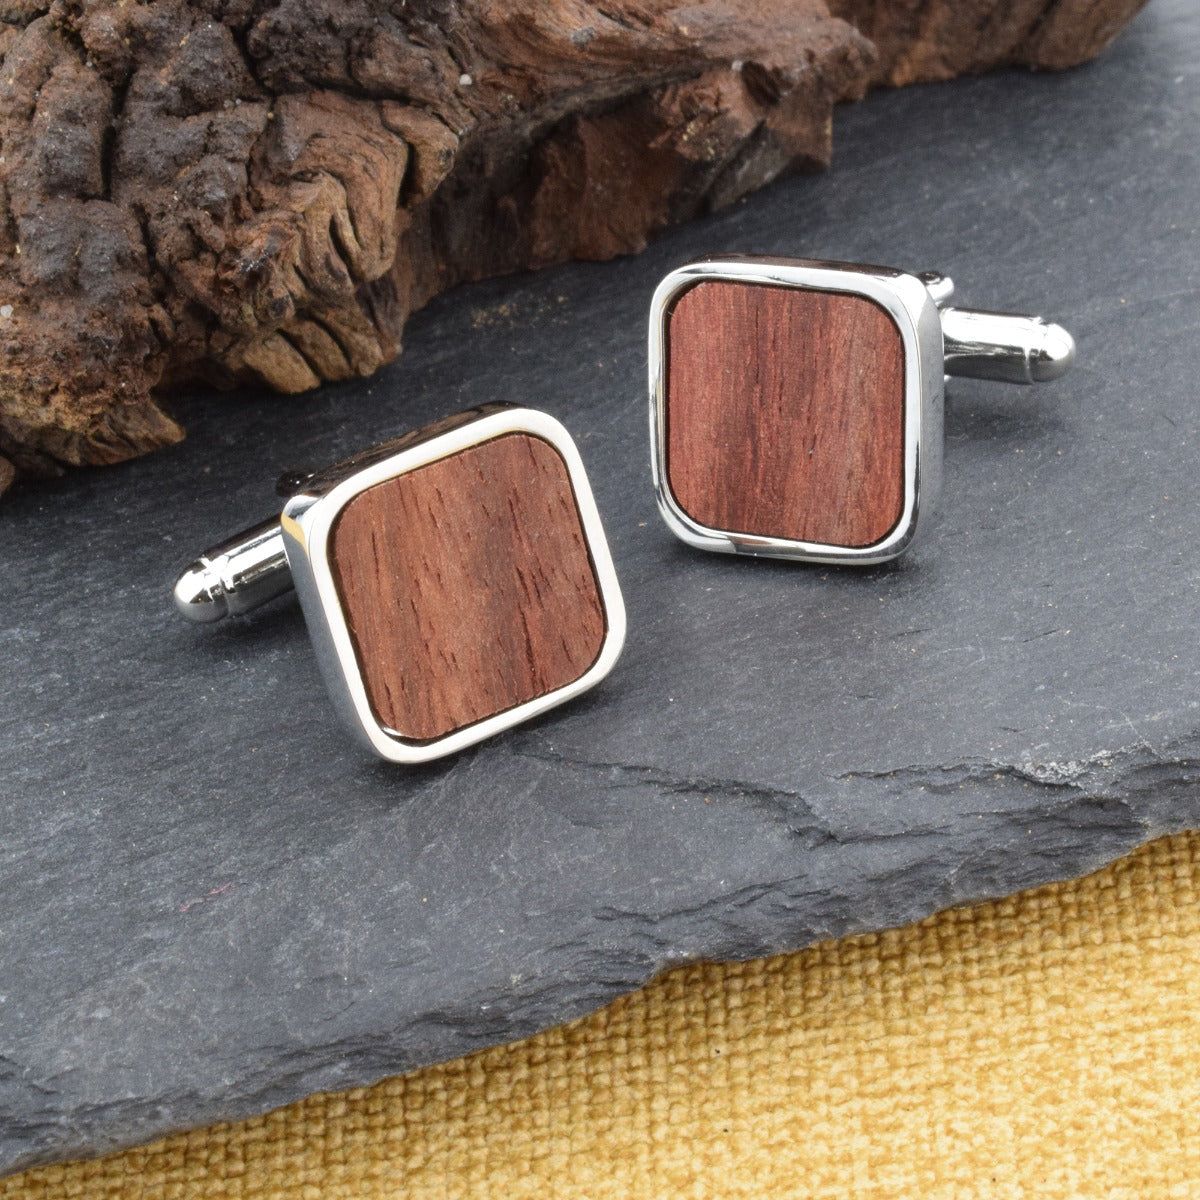 Rhodium Plated with Wooden insert design Cufflinks - Ashton and Finch